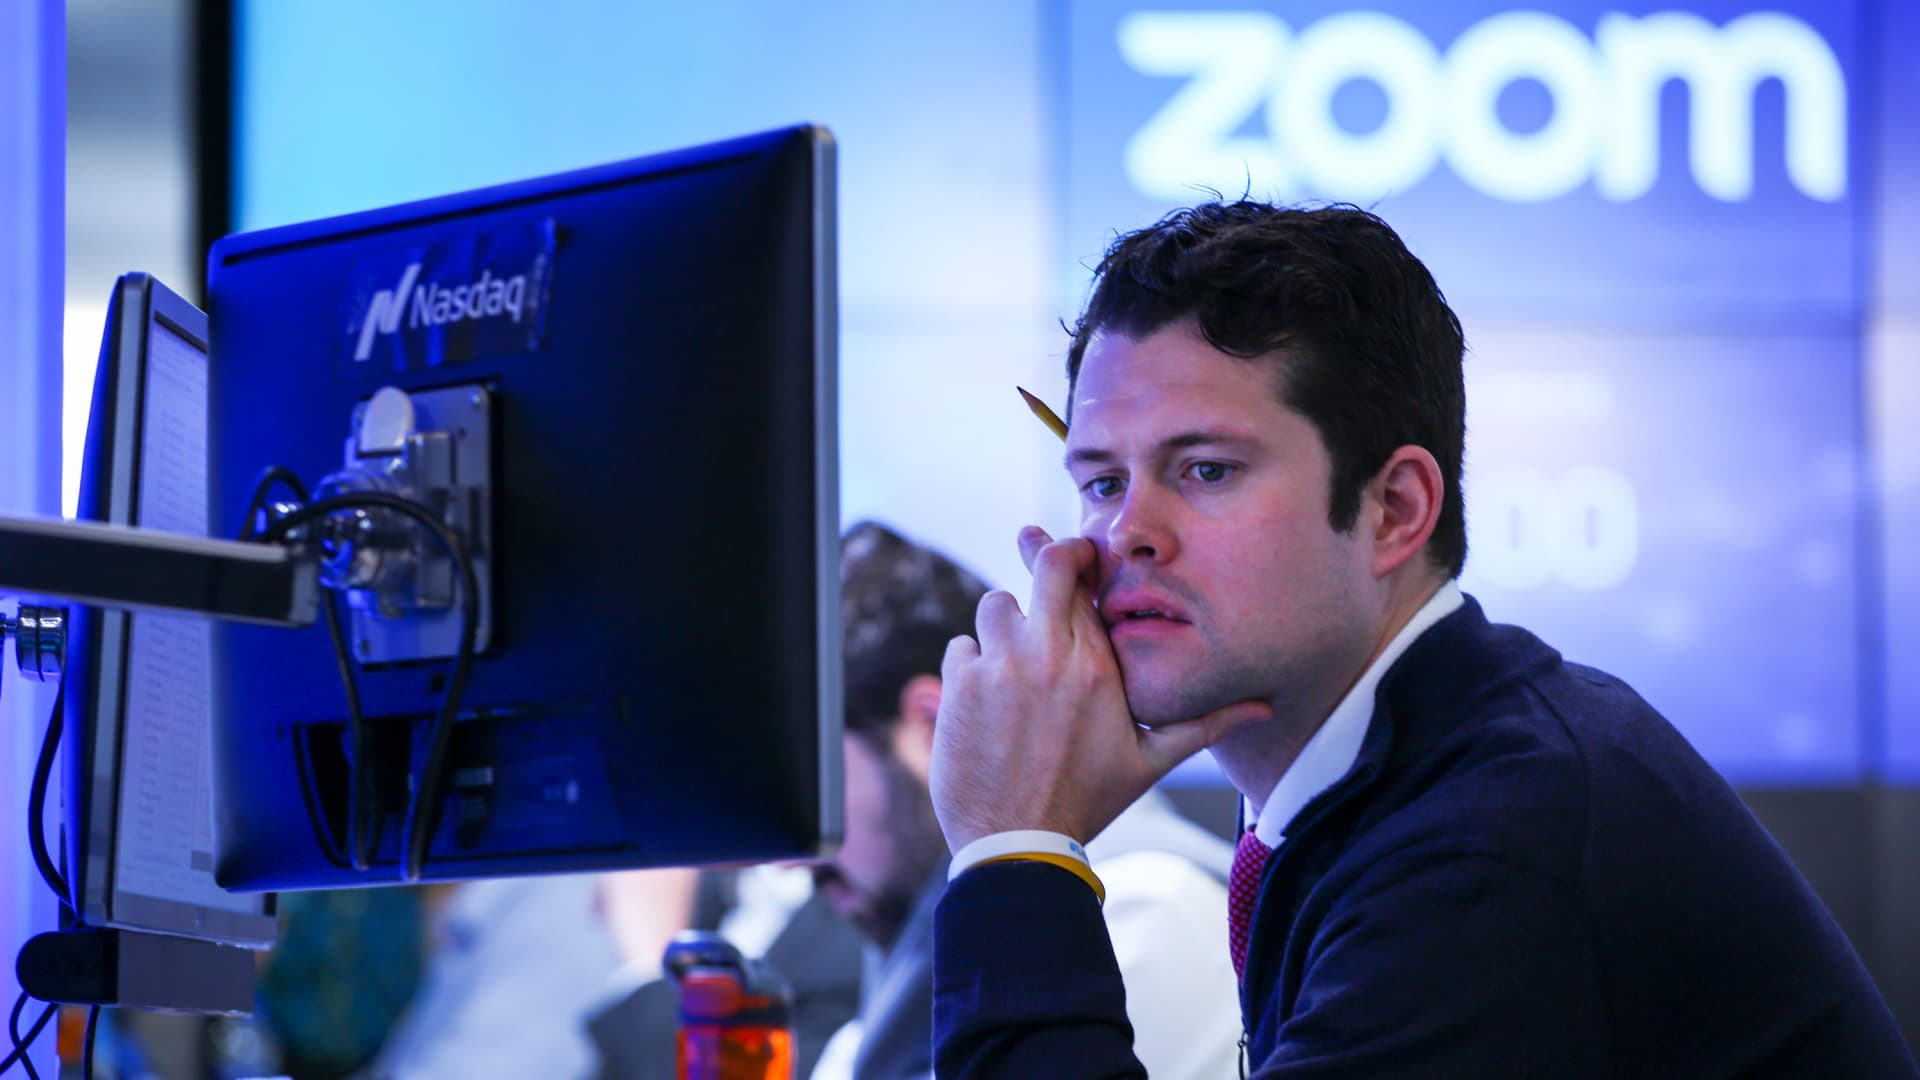 A trader working after the Nasdaq opening bell ceremony on April 18, 2019 in New York City.